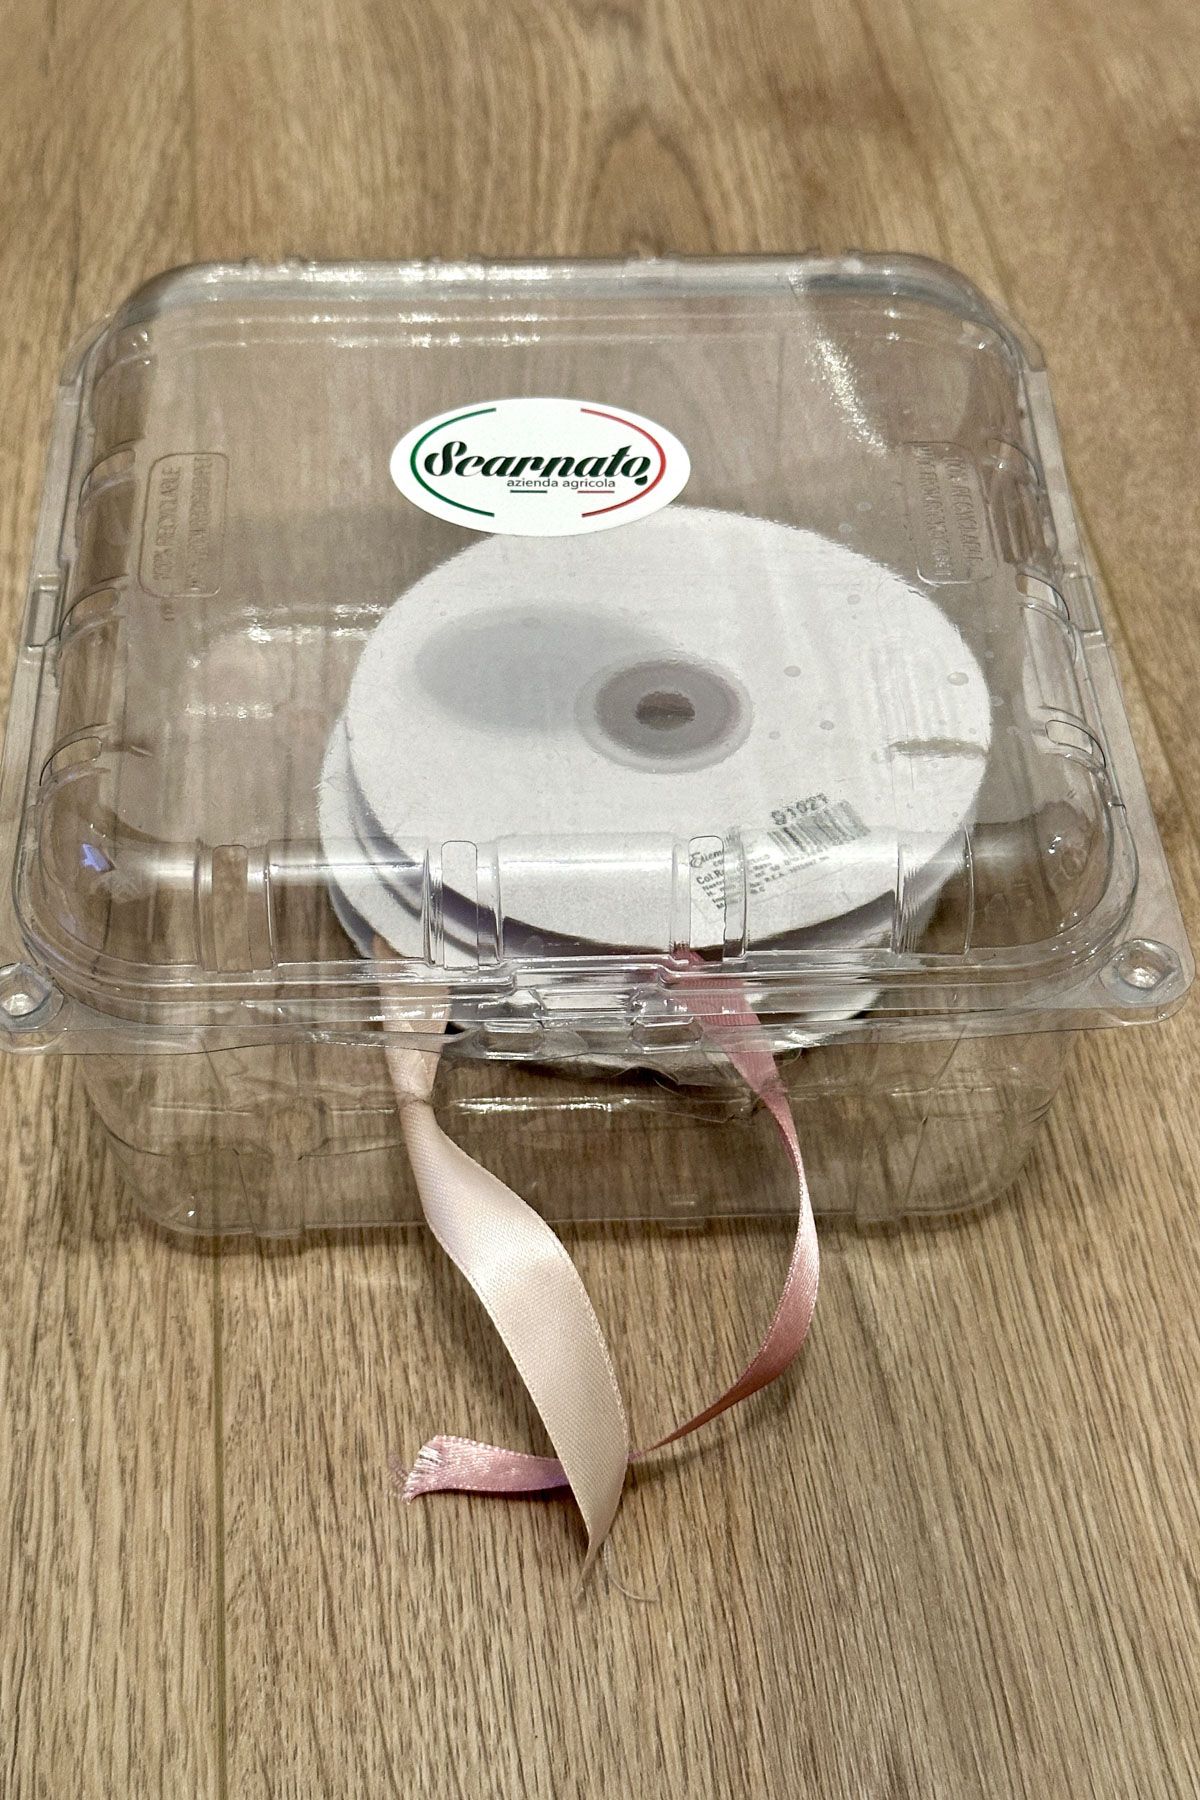 Keep Your Ribbons Organized When Using With A Plastic Container